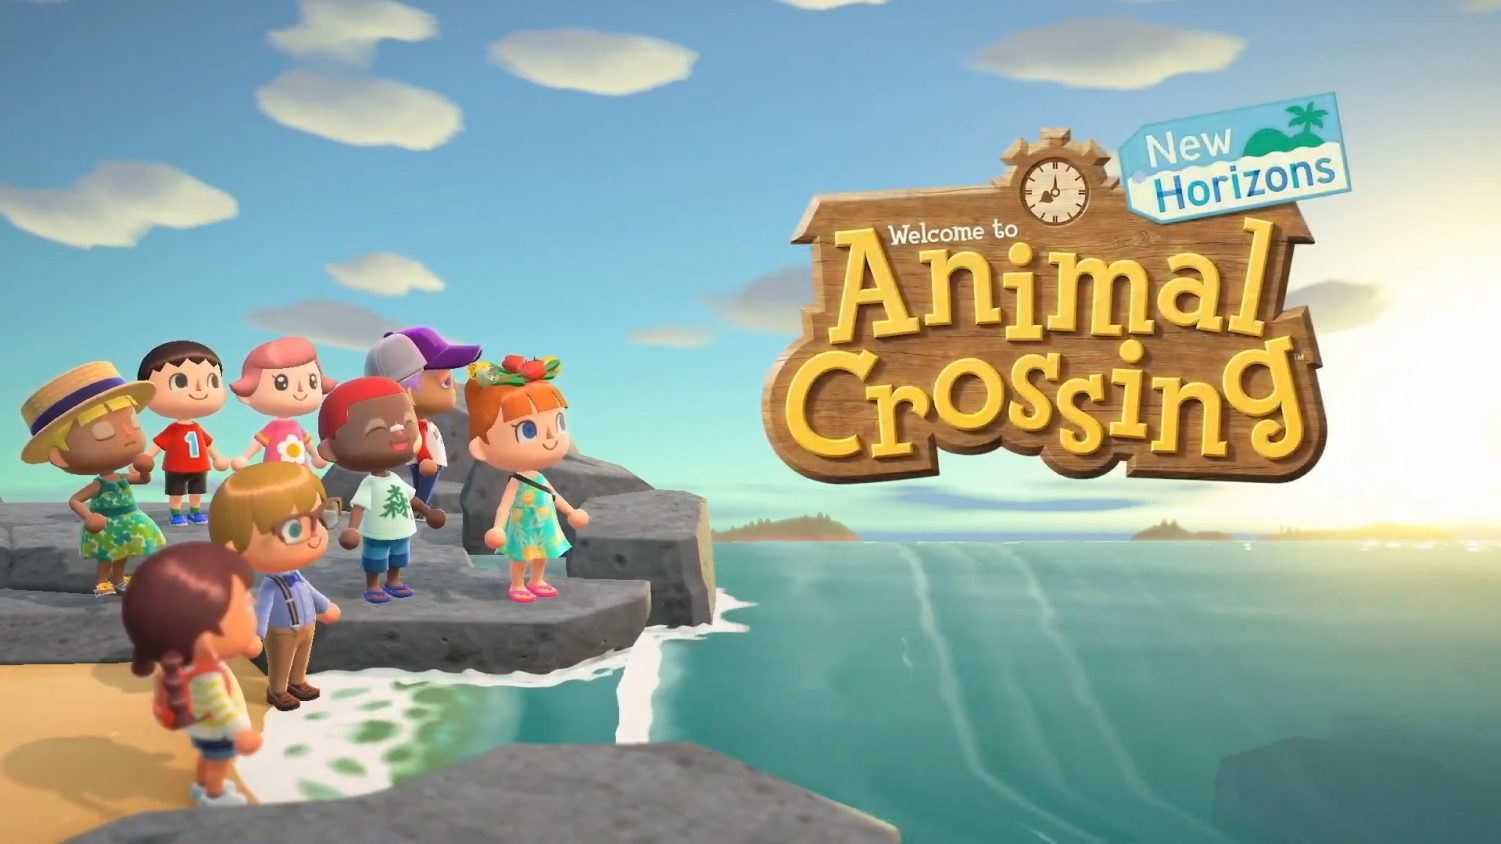 Animal Crossing: New Horizons is a game that simulates real life. This newest iteration is the fifth worldwide release of a game in the series. 